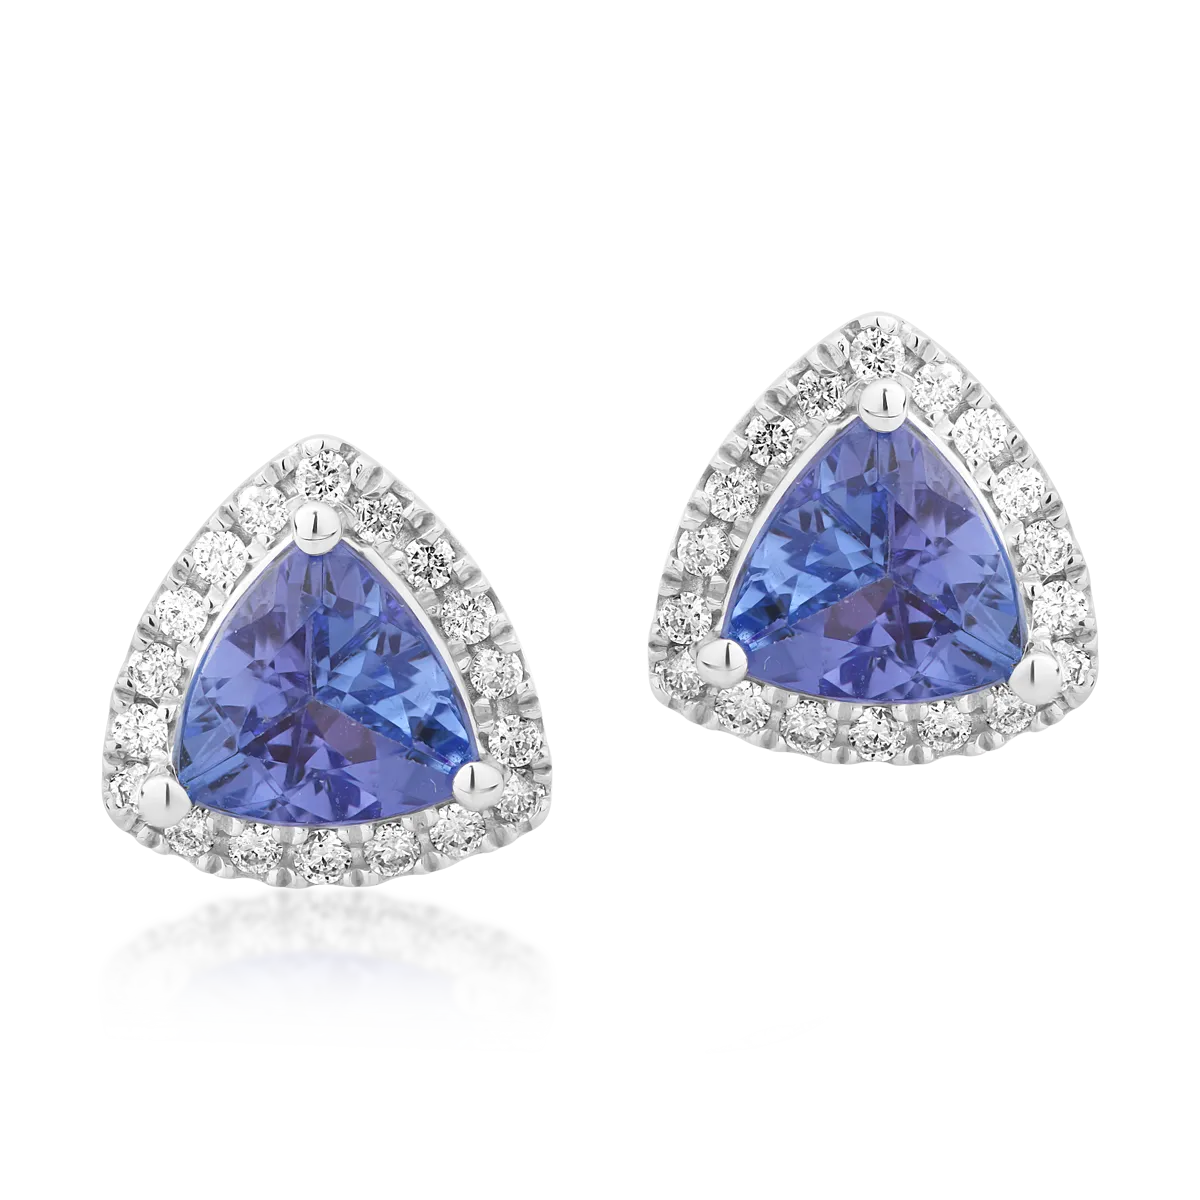 18K white gold earrings with 1.53ct tanzanite and 0.18ct diamonds